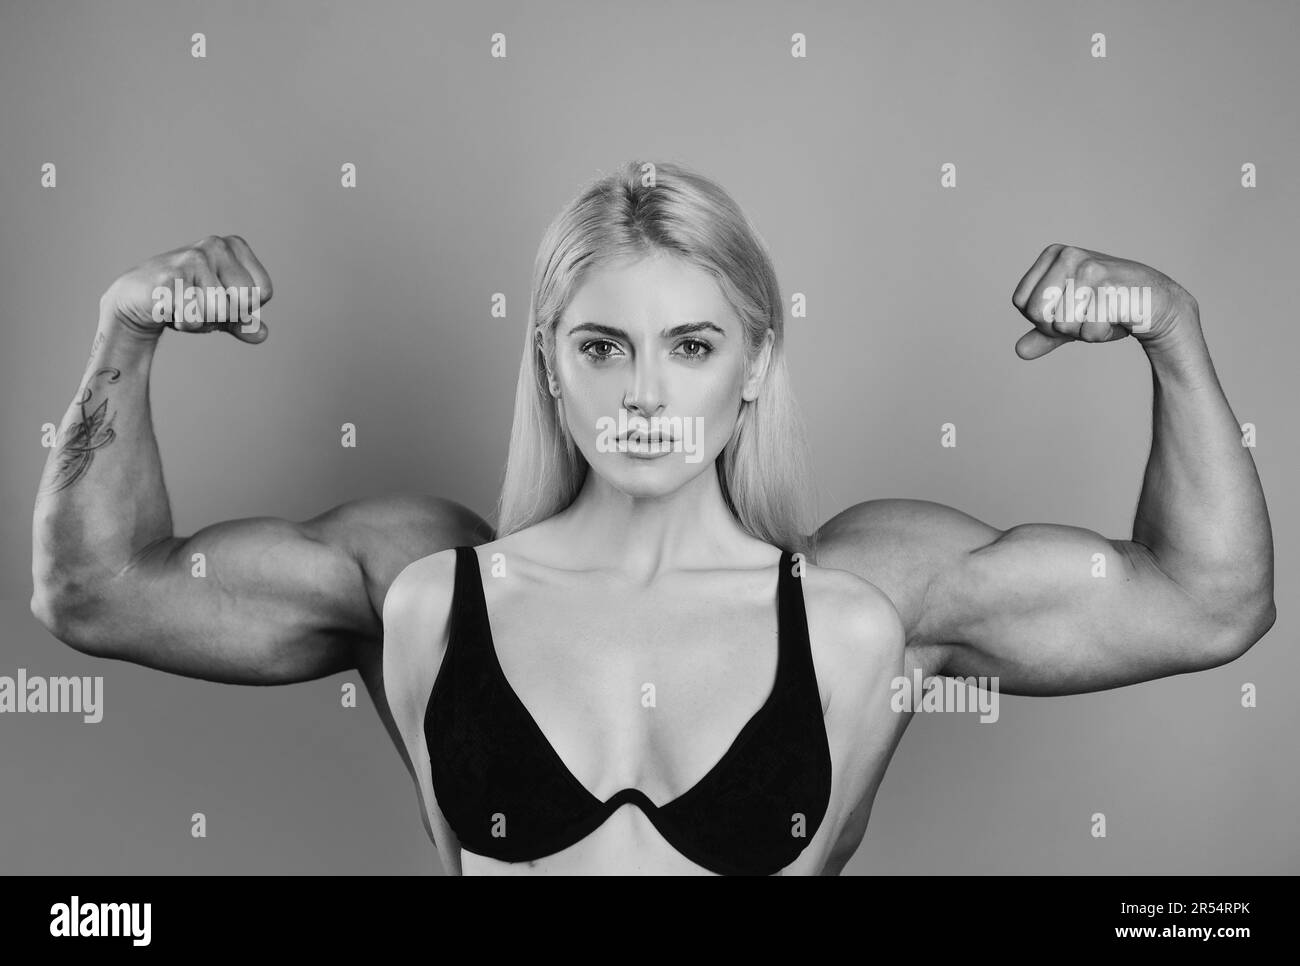 https://c8.alamy.com/comp/2R54RPK/female-model-keeps-fit-and-healthy-raises-hands-and-shows-muscles-power-strong-muscle-arms-funny-sport-woman-with-man-muscle-arms-on-back-young-2R54RPK.jpg